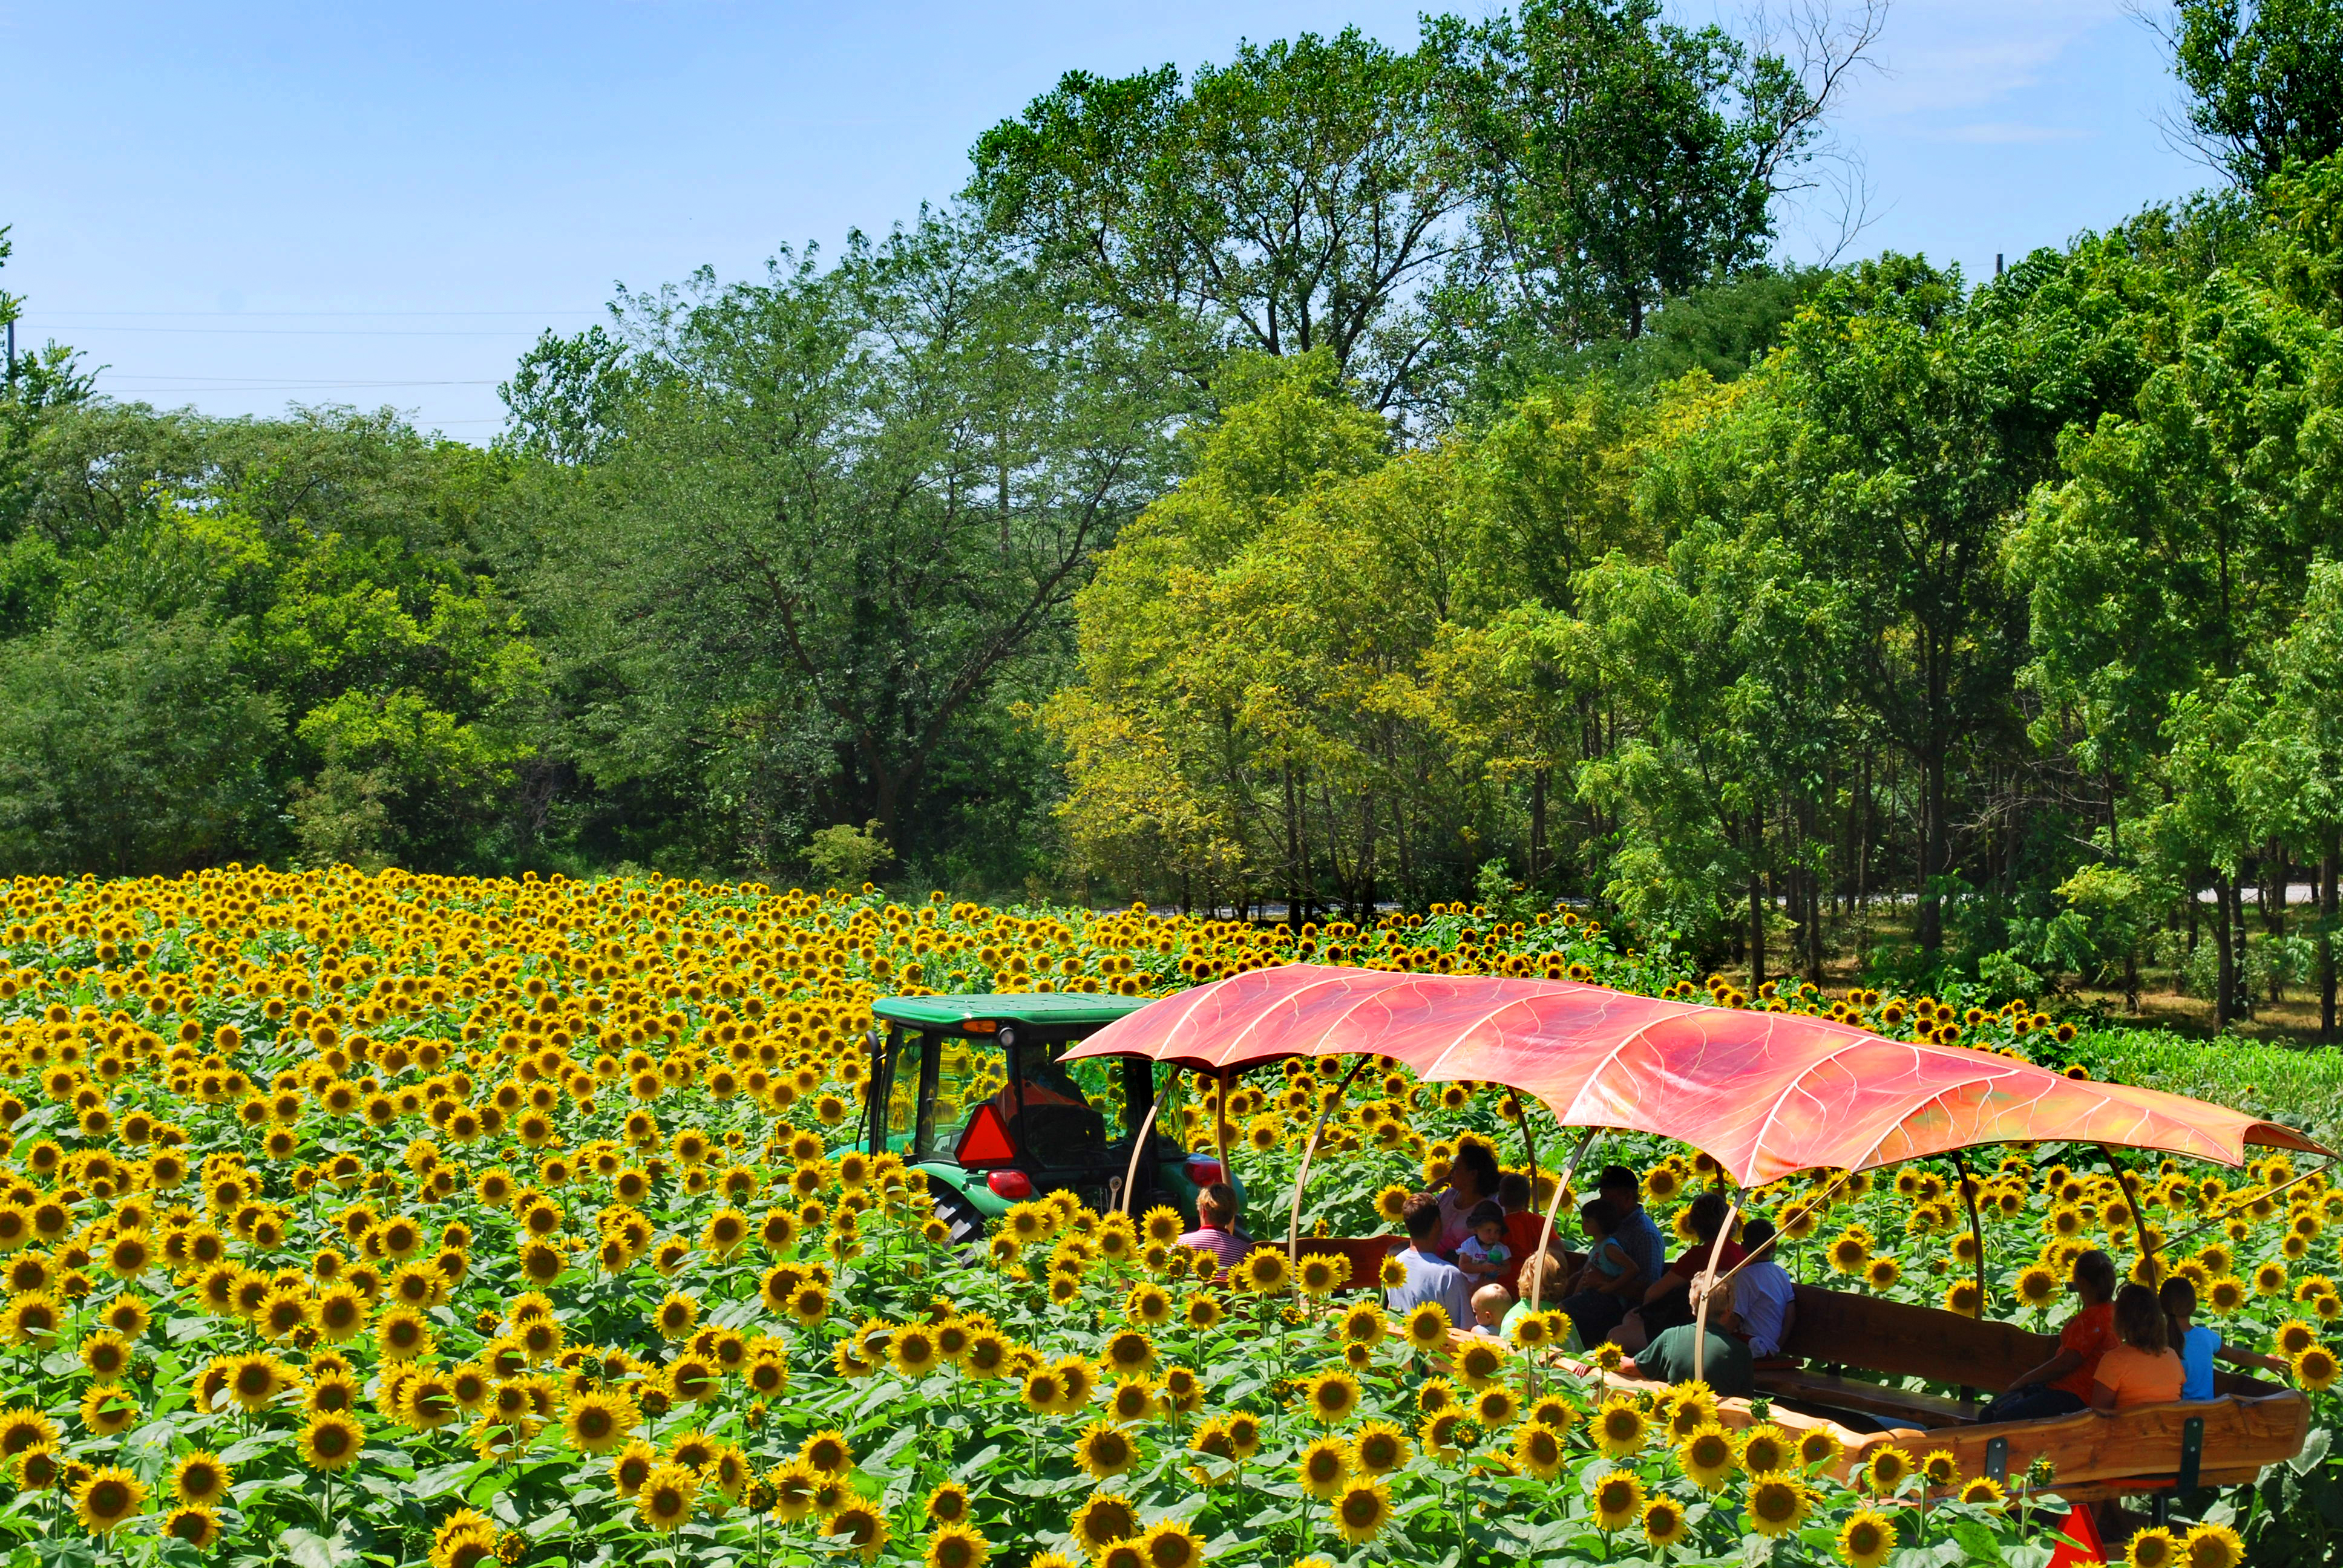 Sunflowers in Bloom NOW at Arbor Day Farm